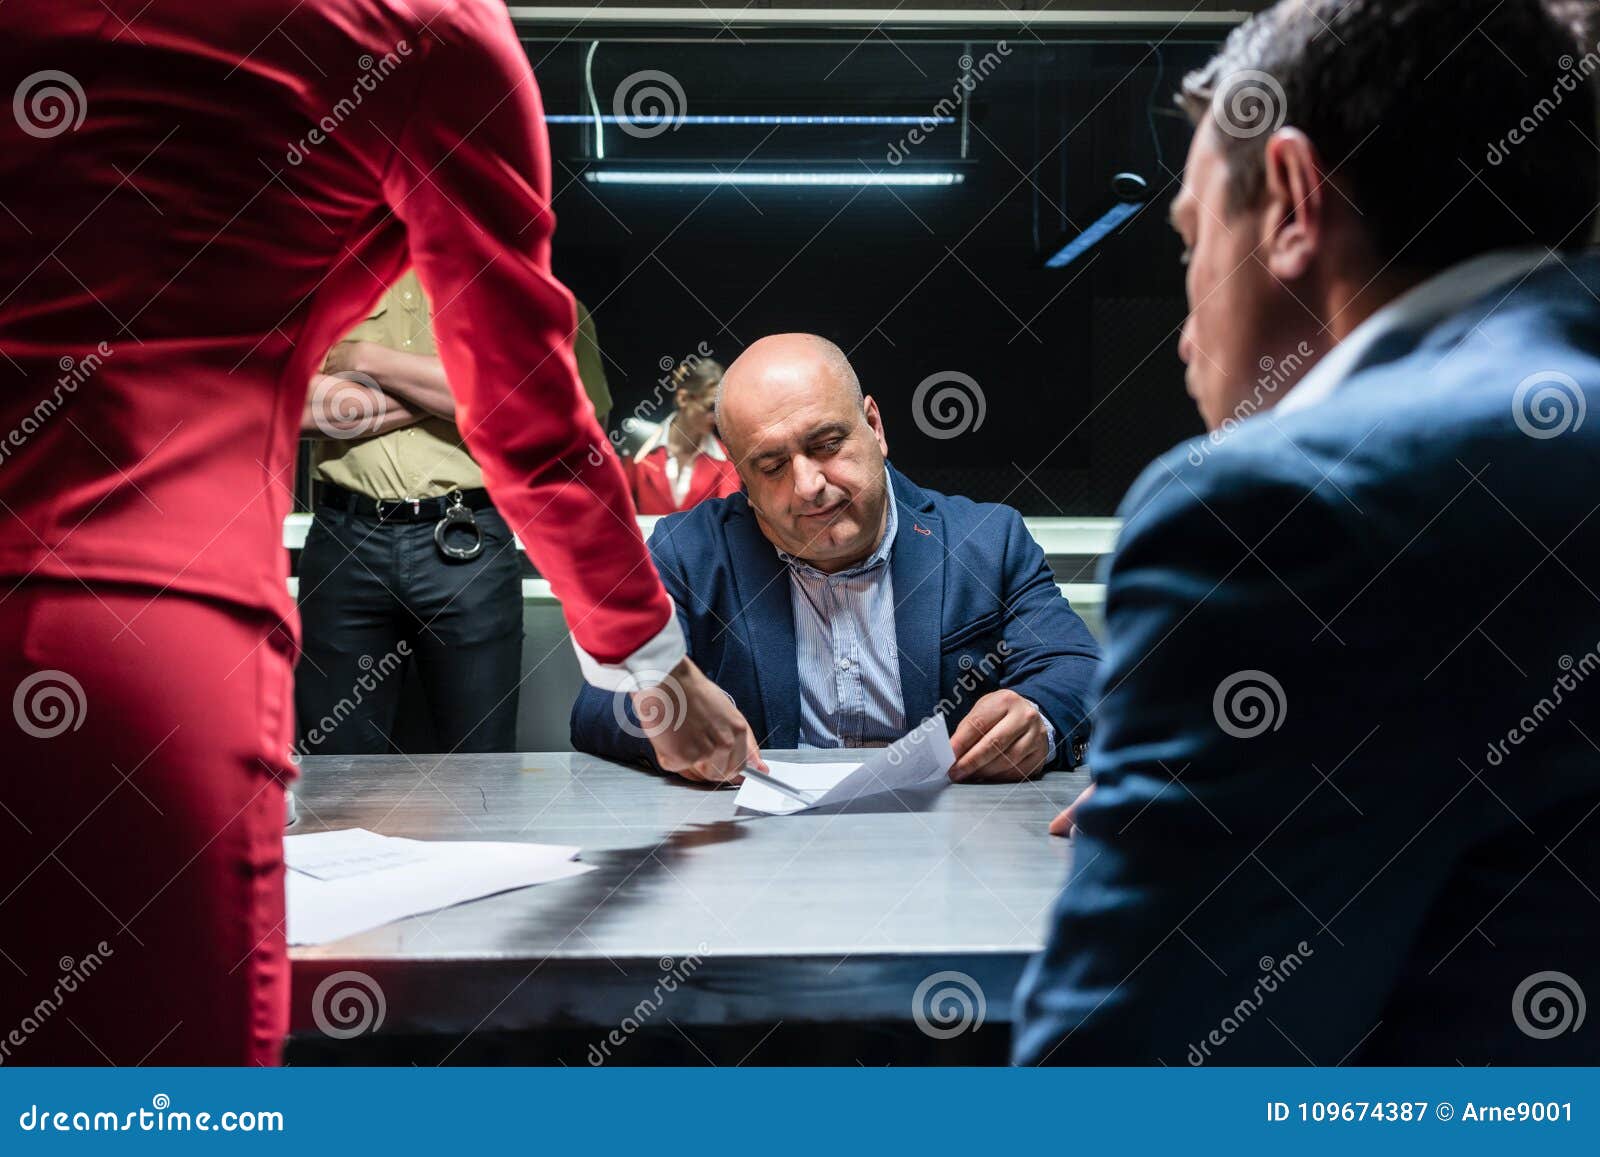 defendant or witness counseled by the lawyer to sign an official statement